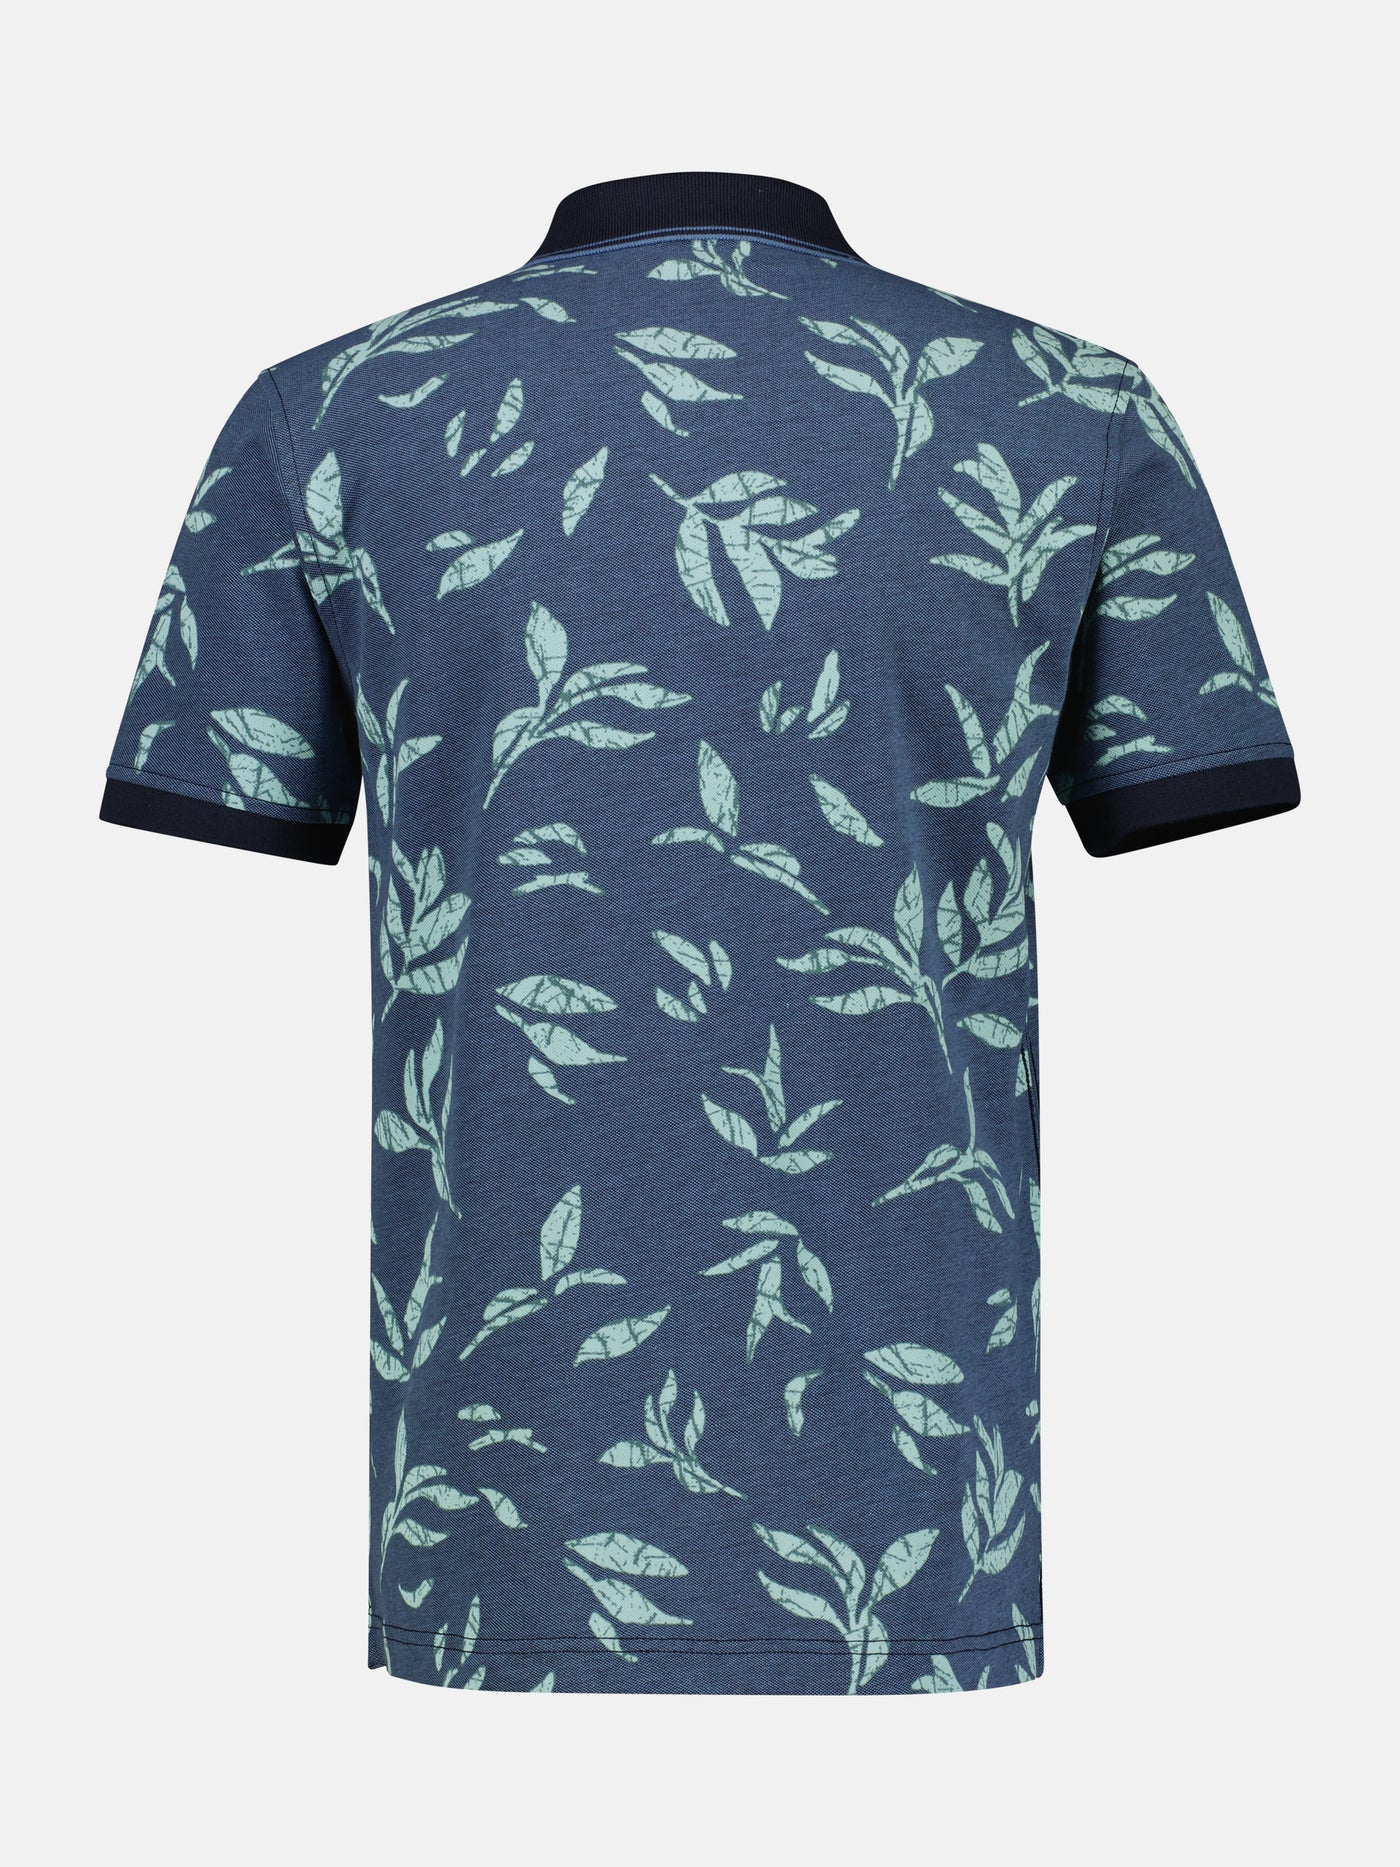 Polo shirt with floral print and contrasting details